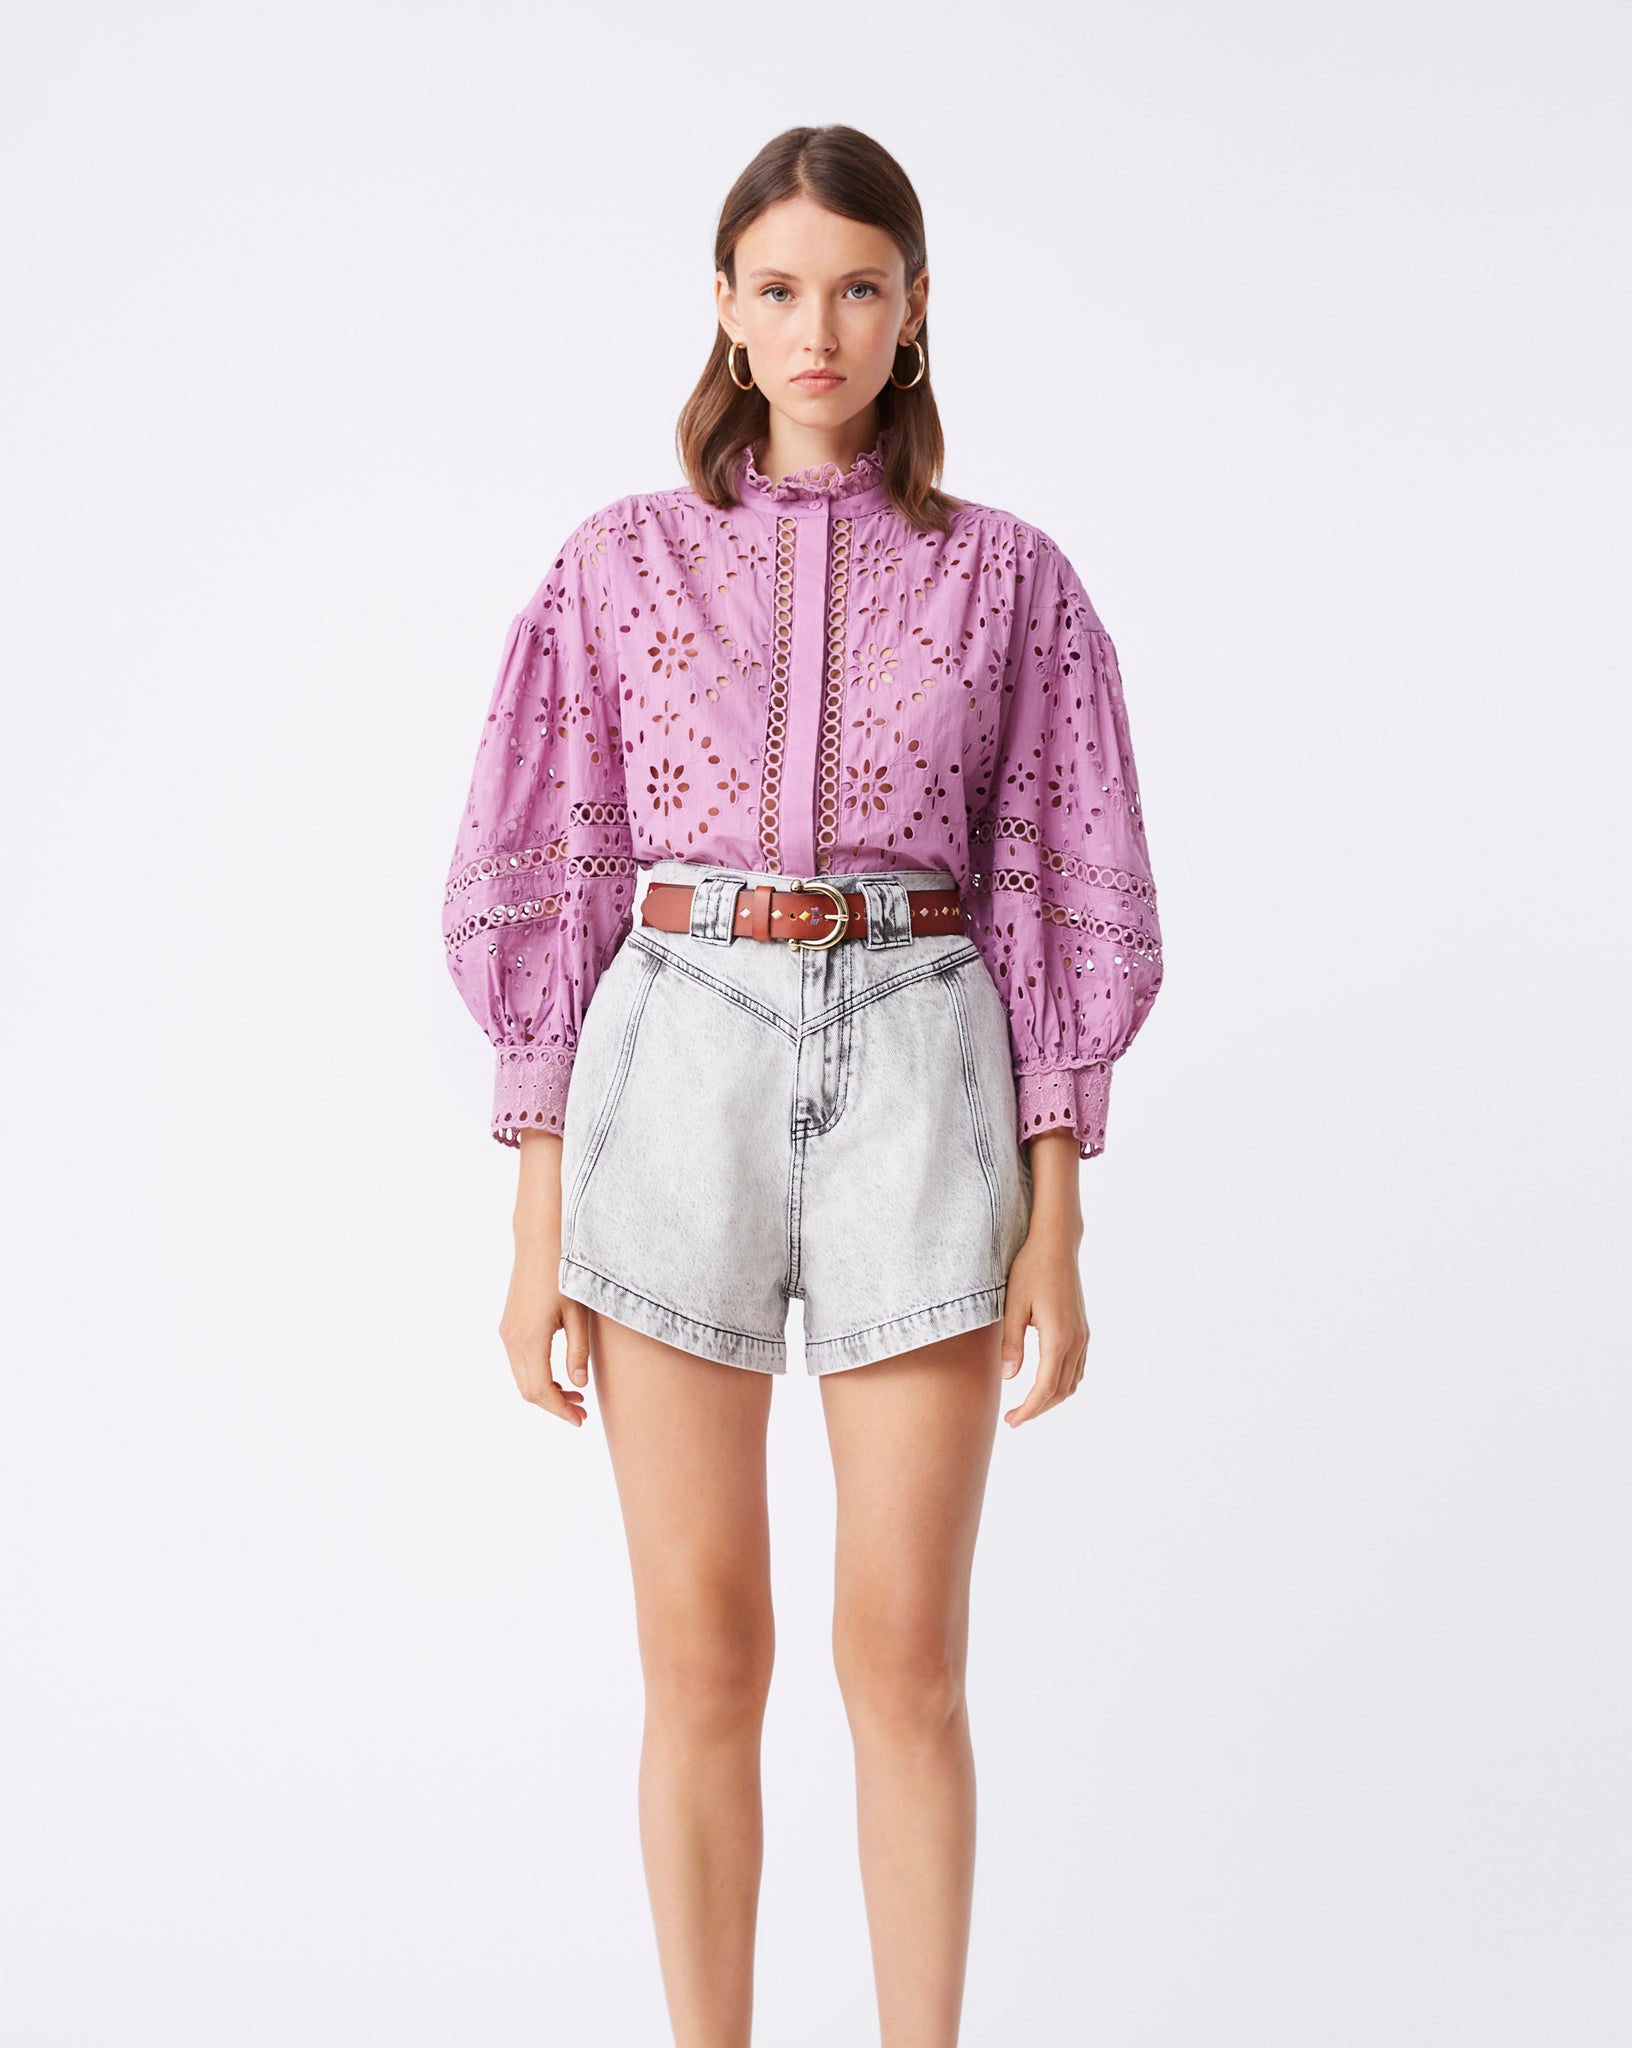 Purple Eyelet Top by Suncoo.